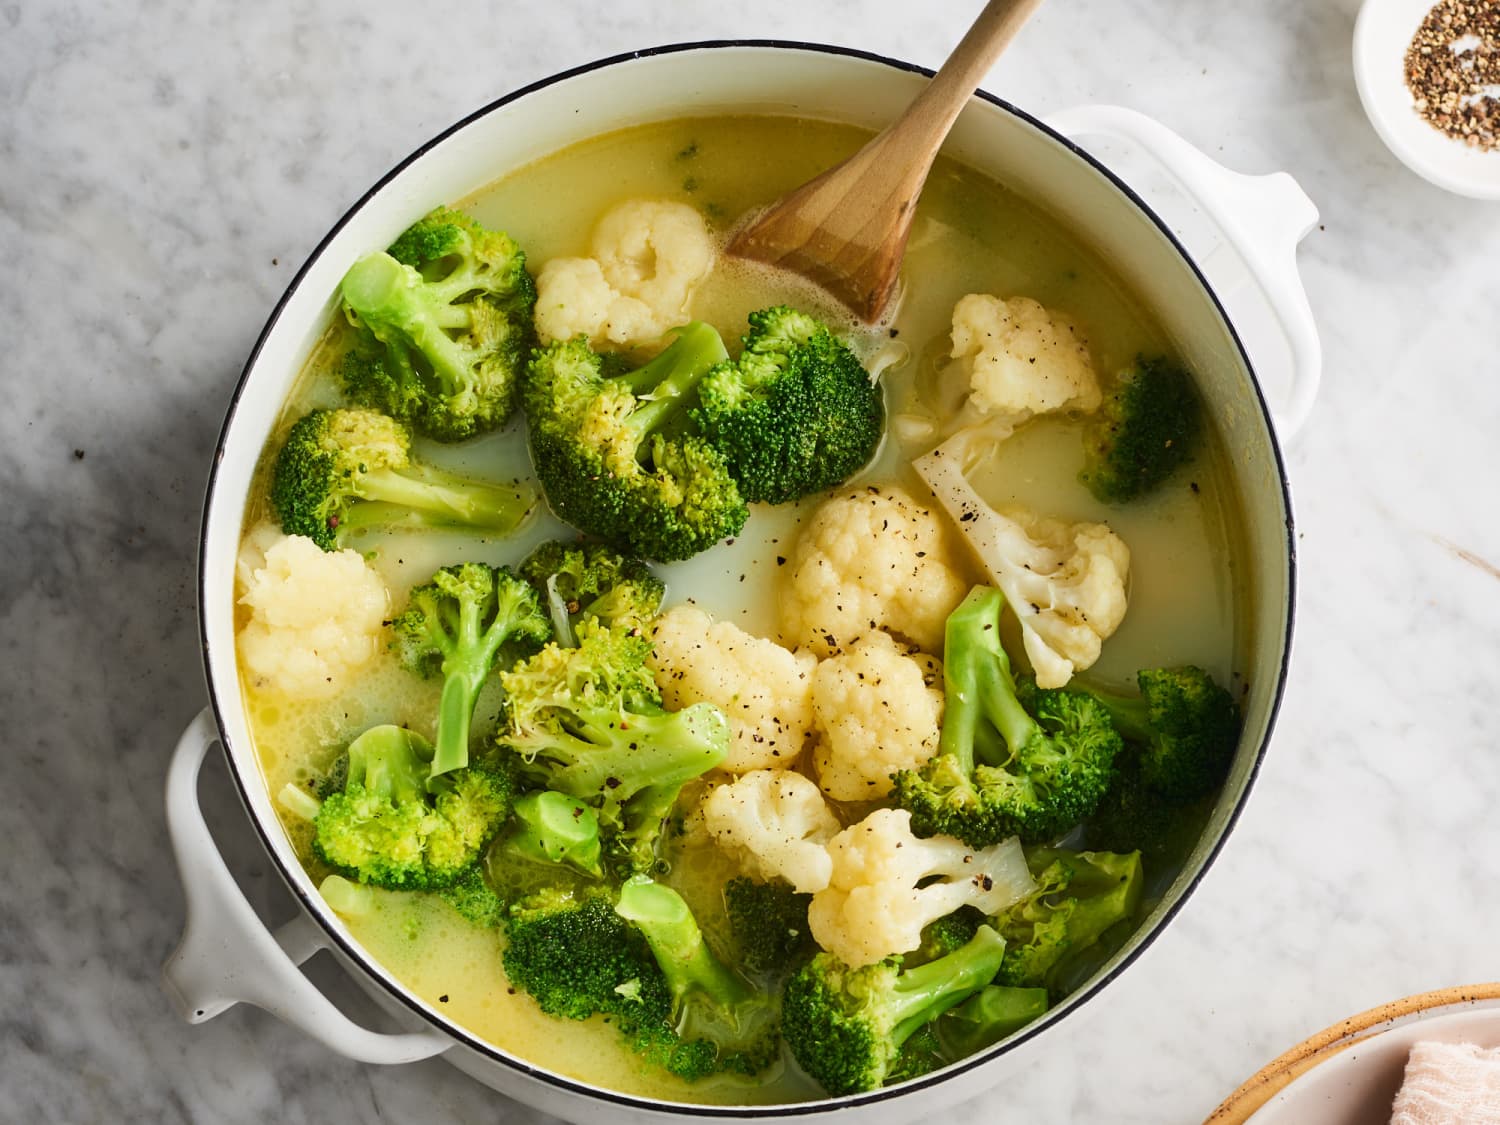 Instant Pot Steamed Broccoli and Cauliflower